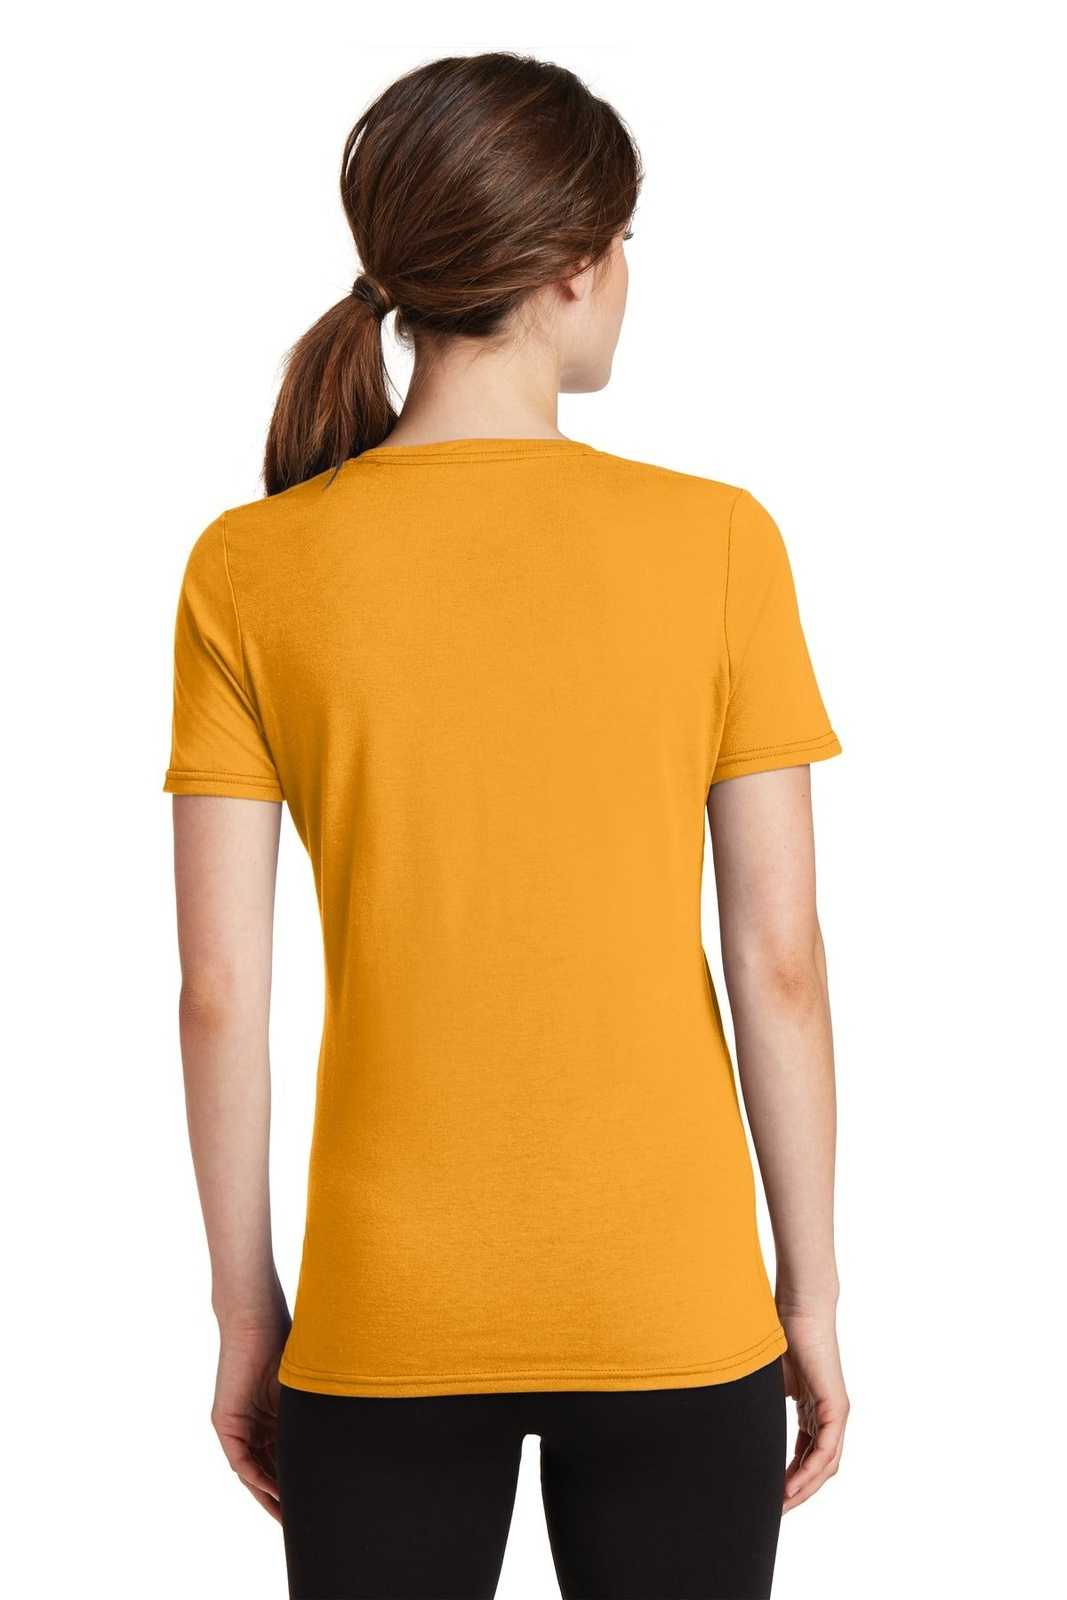 Port &amp; Company LPC381V Ladies Performance Blend V-Neck Tee - Gold - HIT a Double - 2